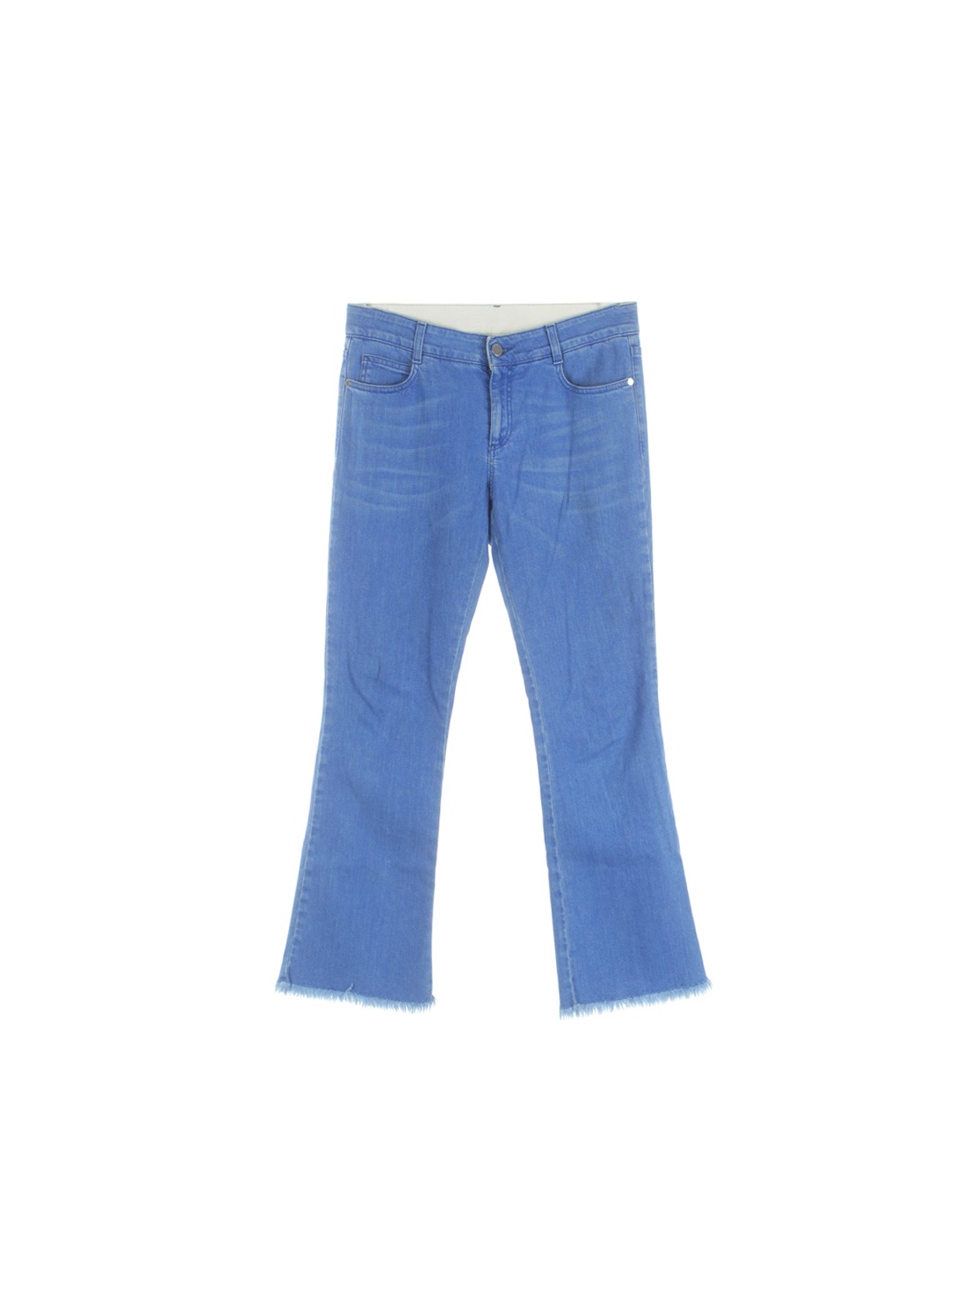 Boutique STELLA MCCARTNEY Dark blue The '70s high-rise flared jeans Retail  price €325 Size 26